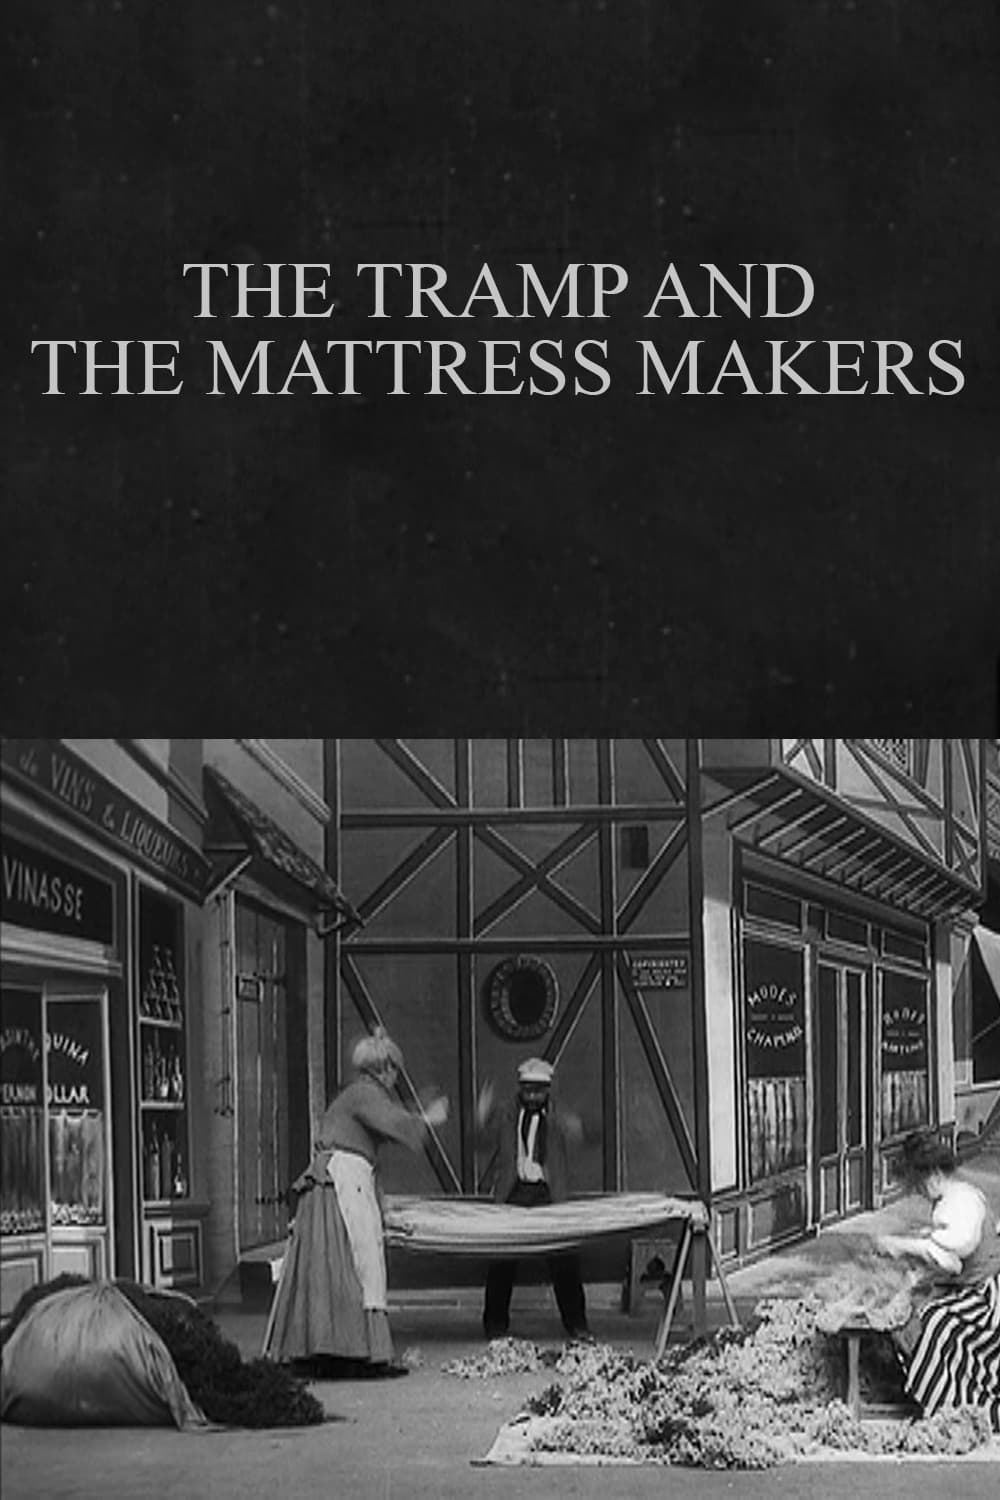 The Tramp and the Mattress Makers